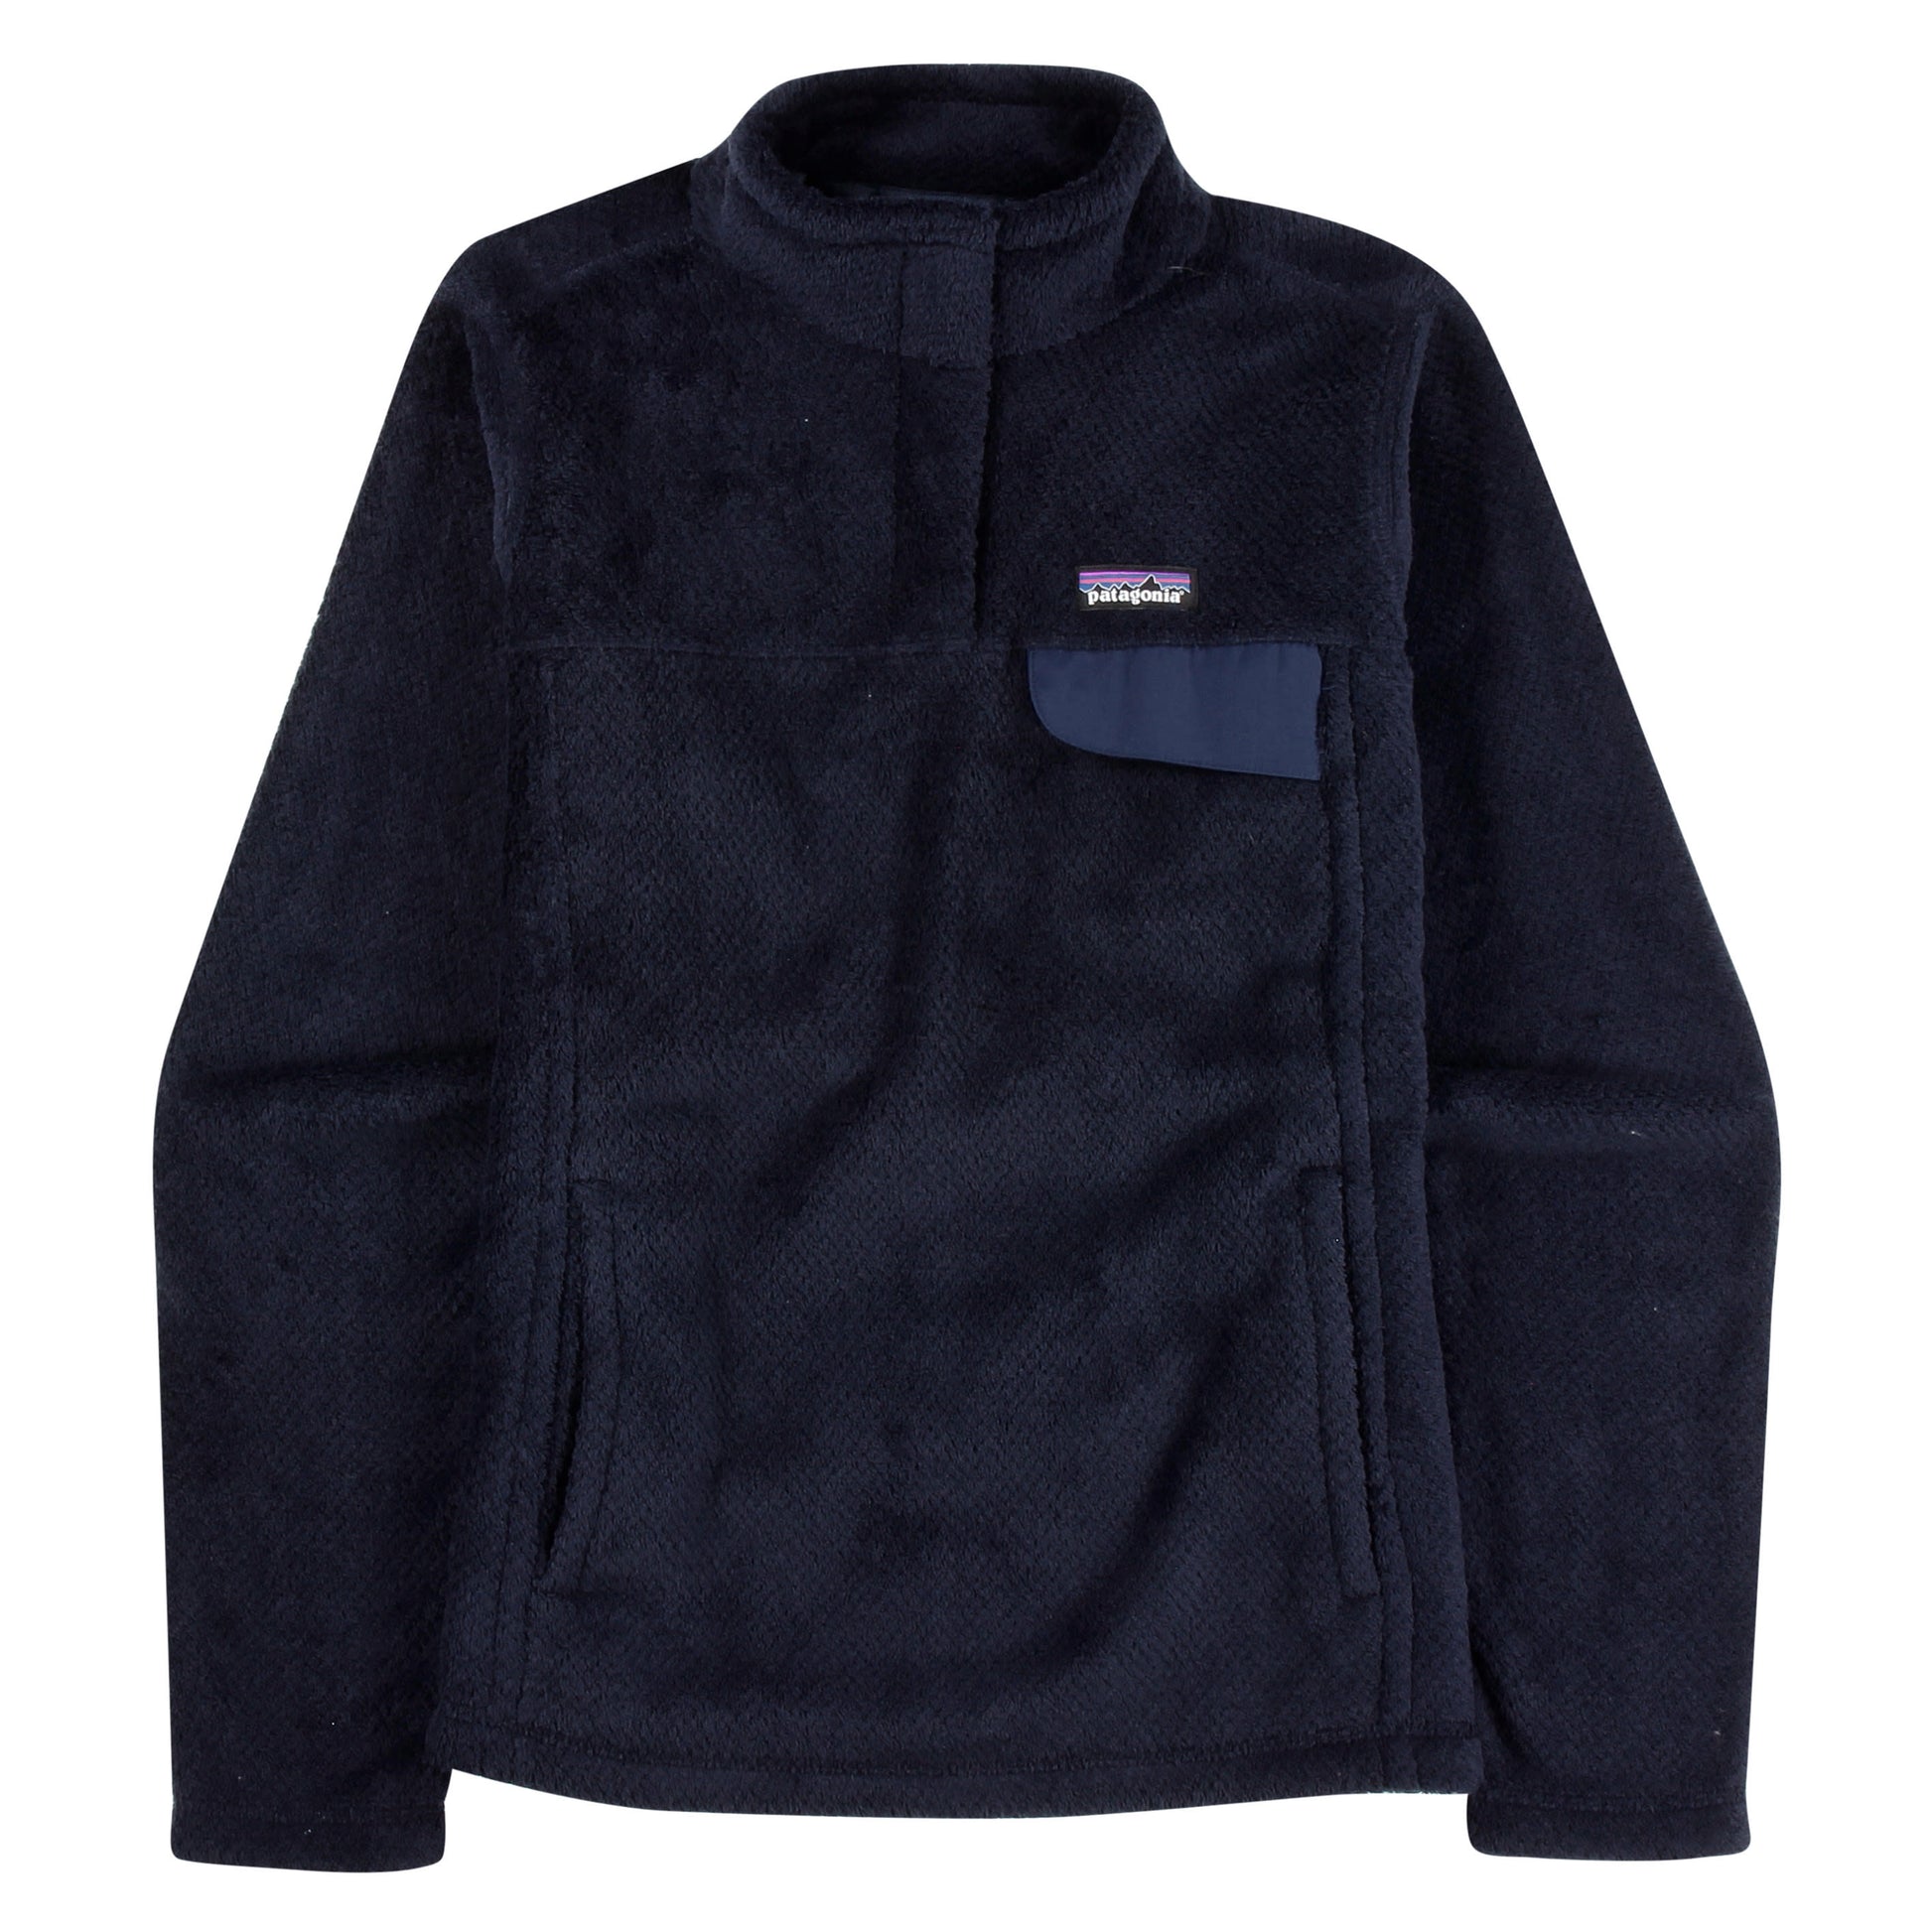 Women's Re-Tool Snap-T® Pullover